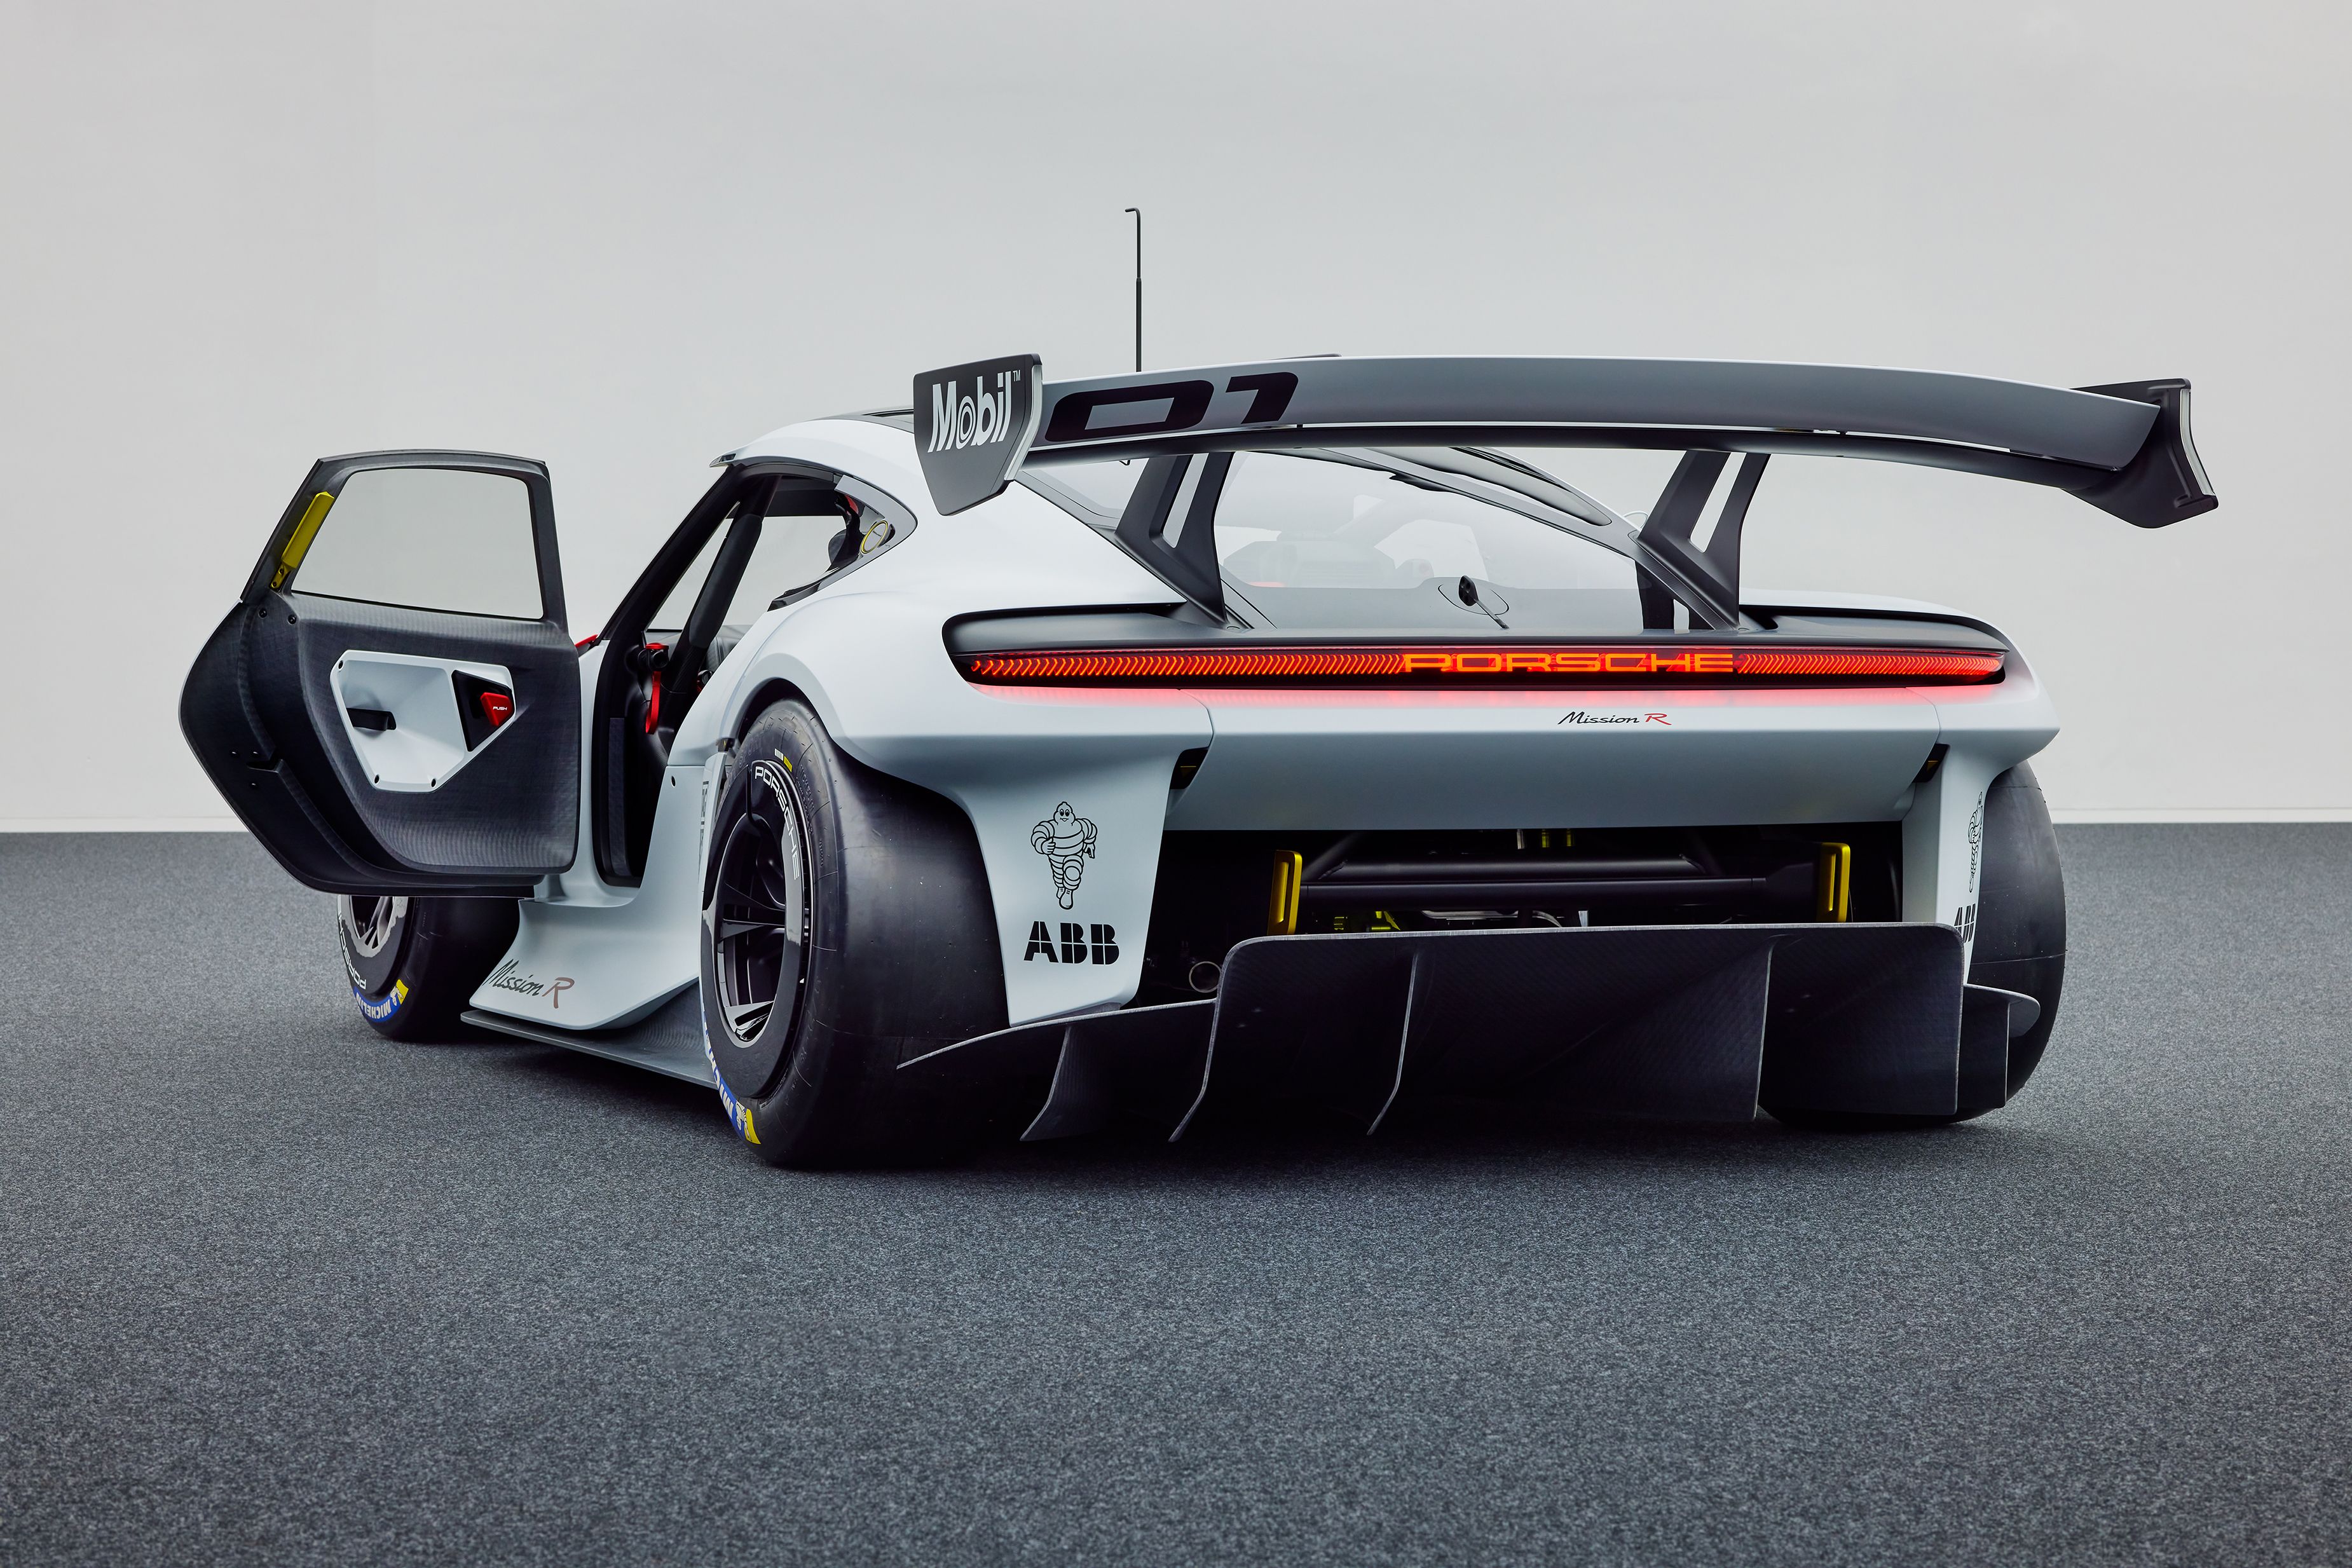 Porsche Mission R Electric Race Car Debuts at Munich Motor Show - Bloomberg